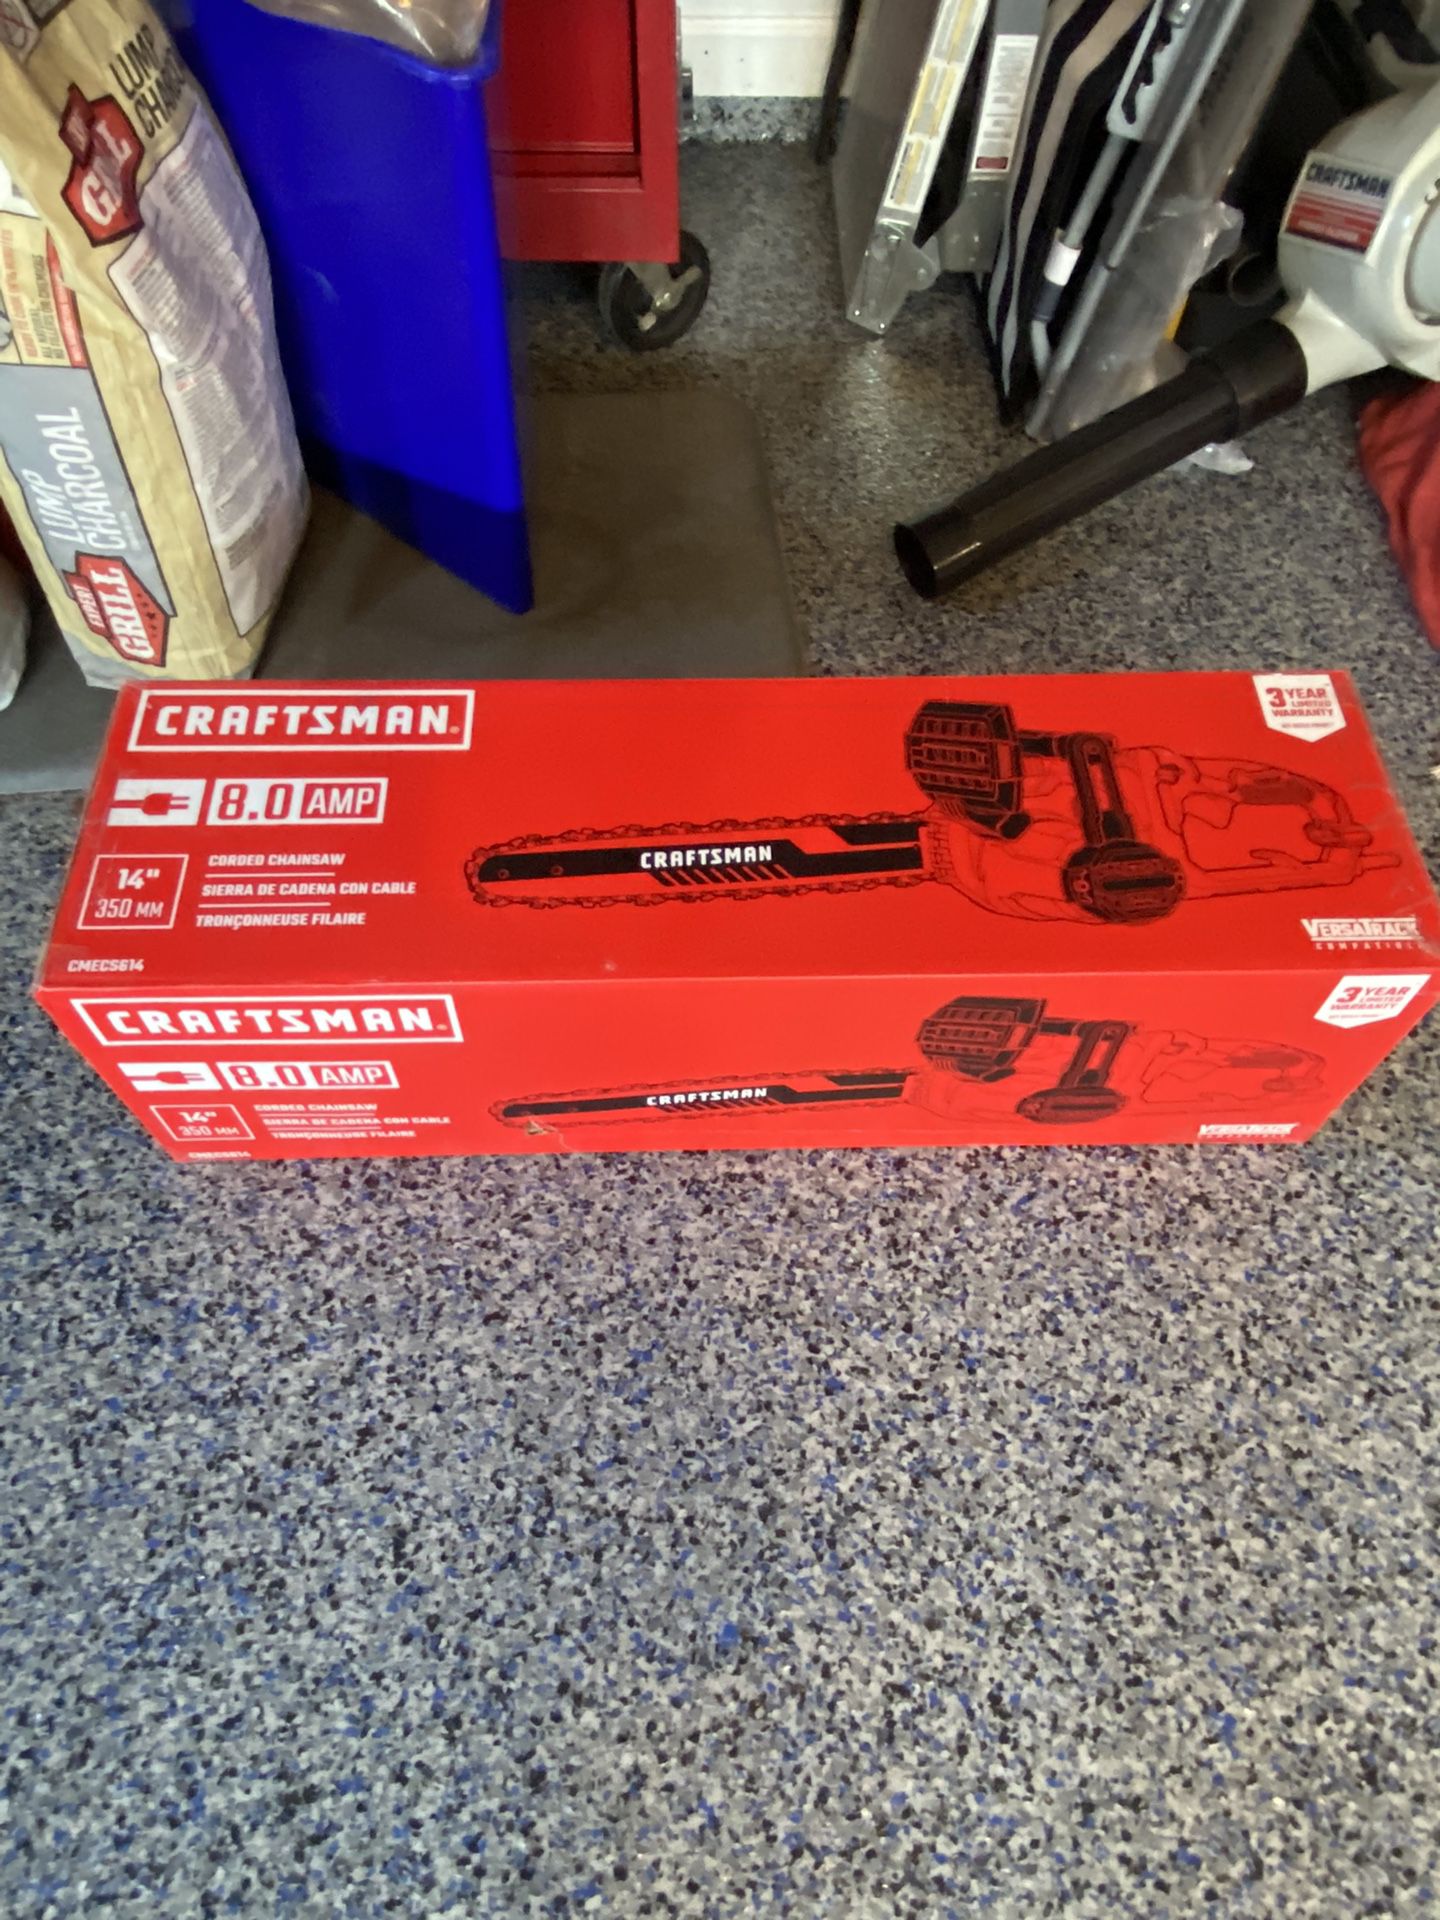 Craftsman 8 Amp corded 14” chainsaw. New in the box never used.